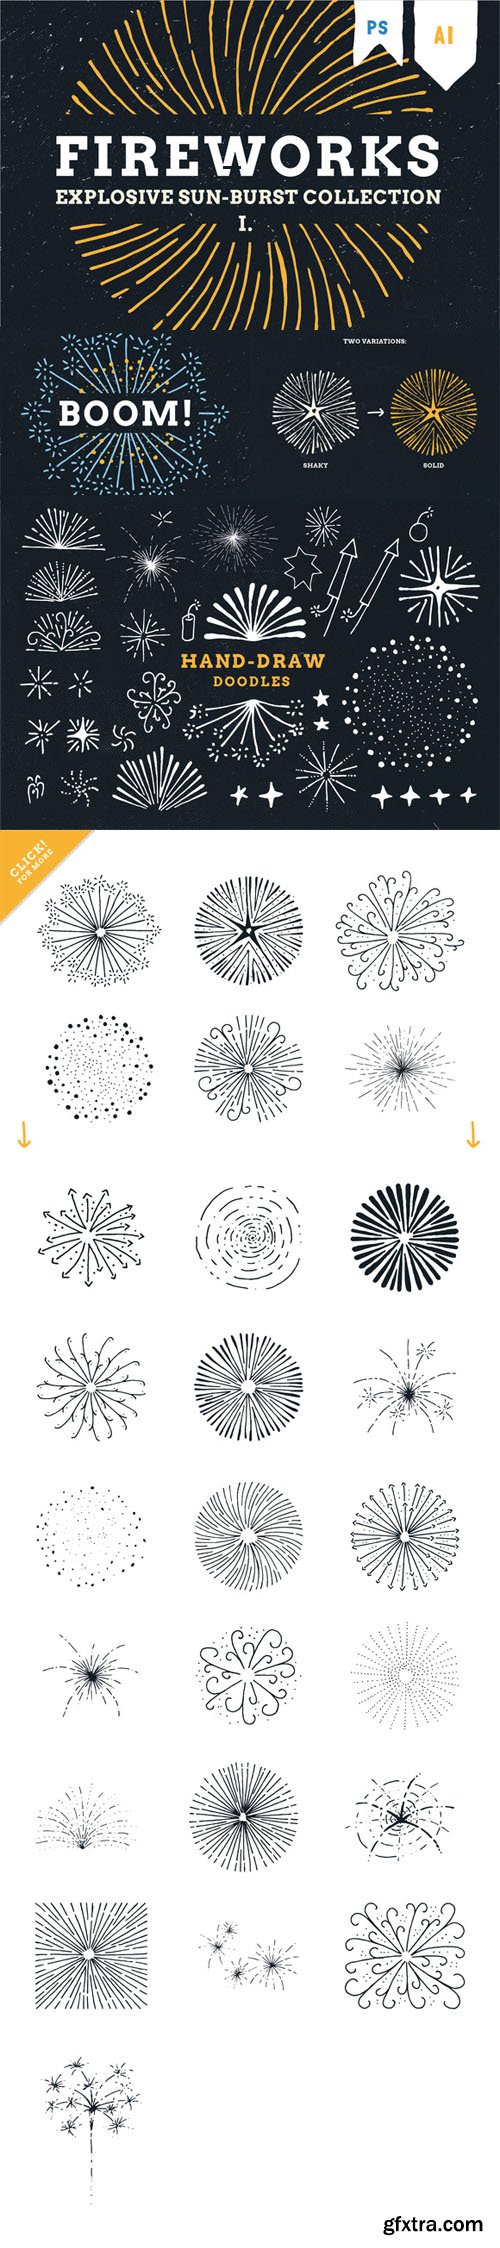 Fireworks - hand draw explosion pack - CM 108191